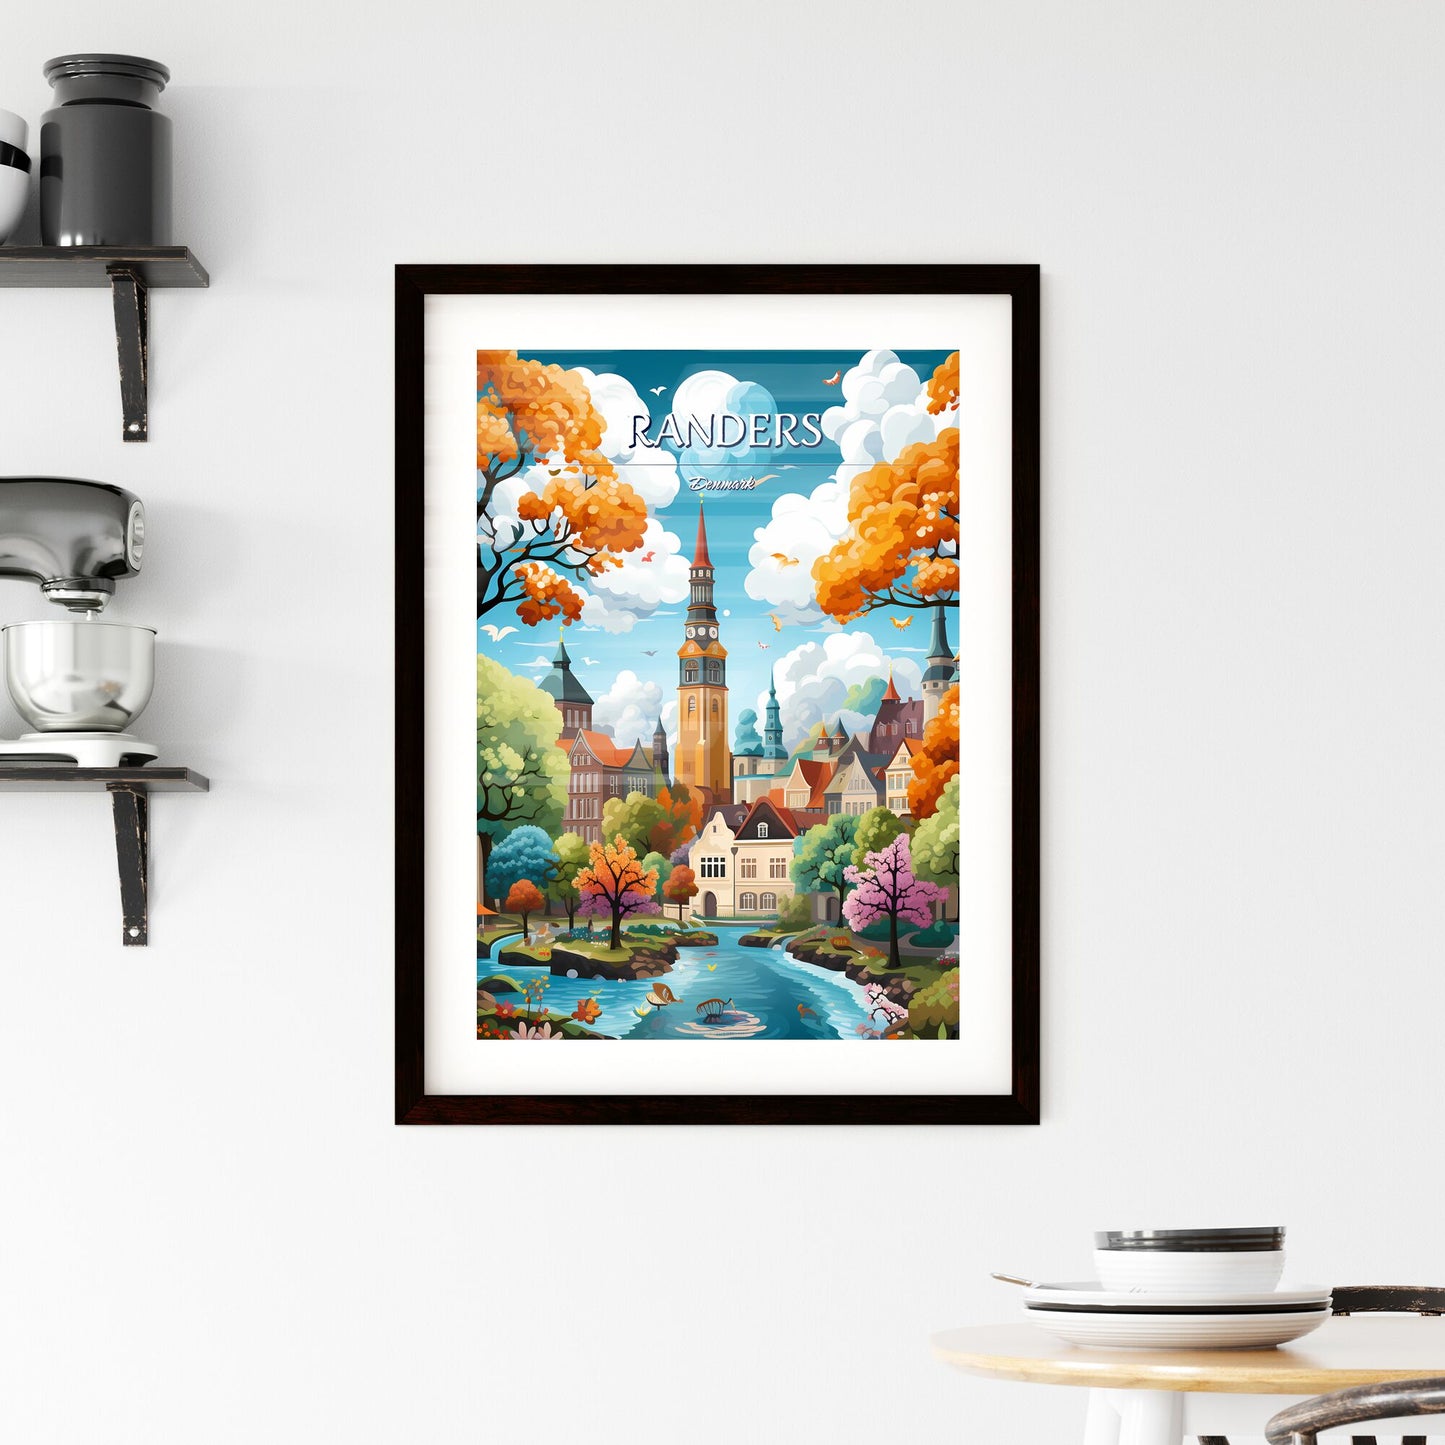 Randers, Denmark - Art print of a colorful landscape with a river and trees and a clock tower Default Title